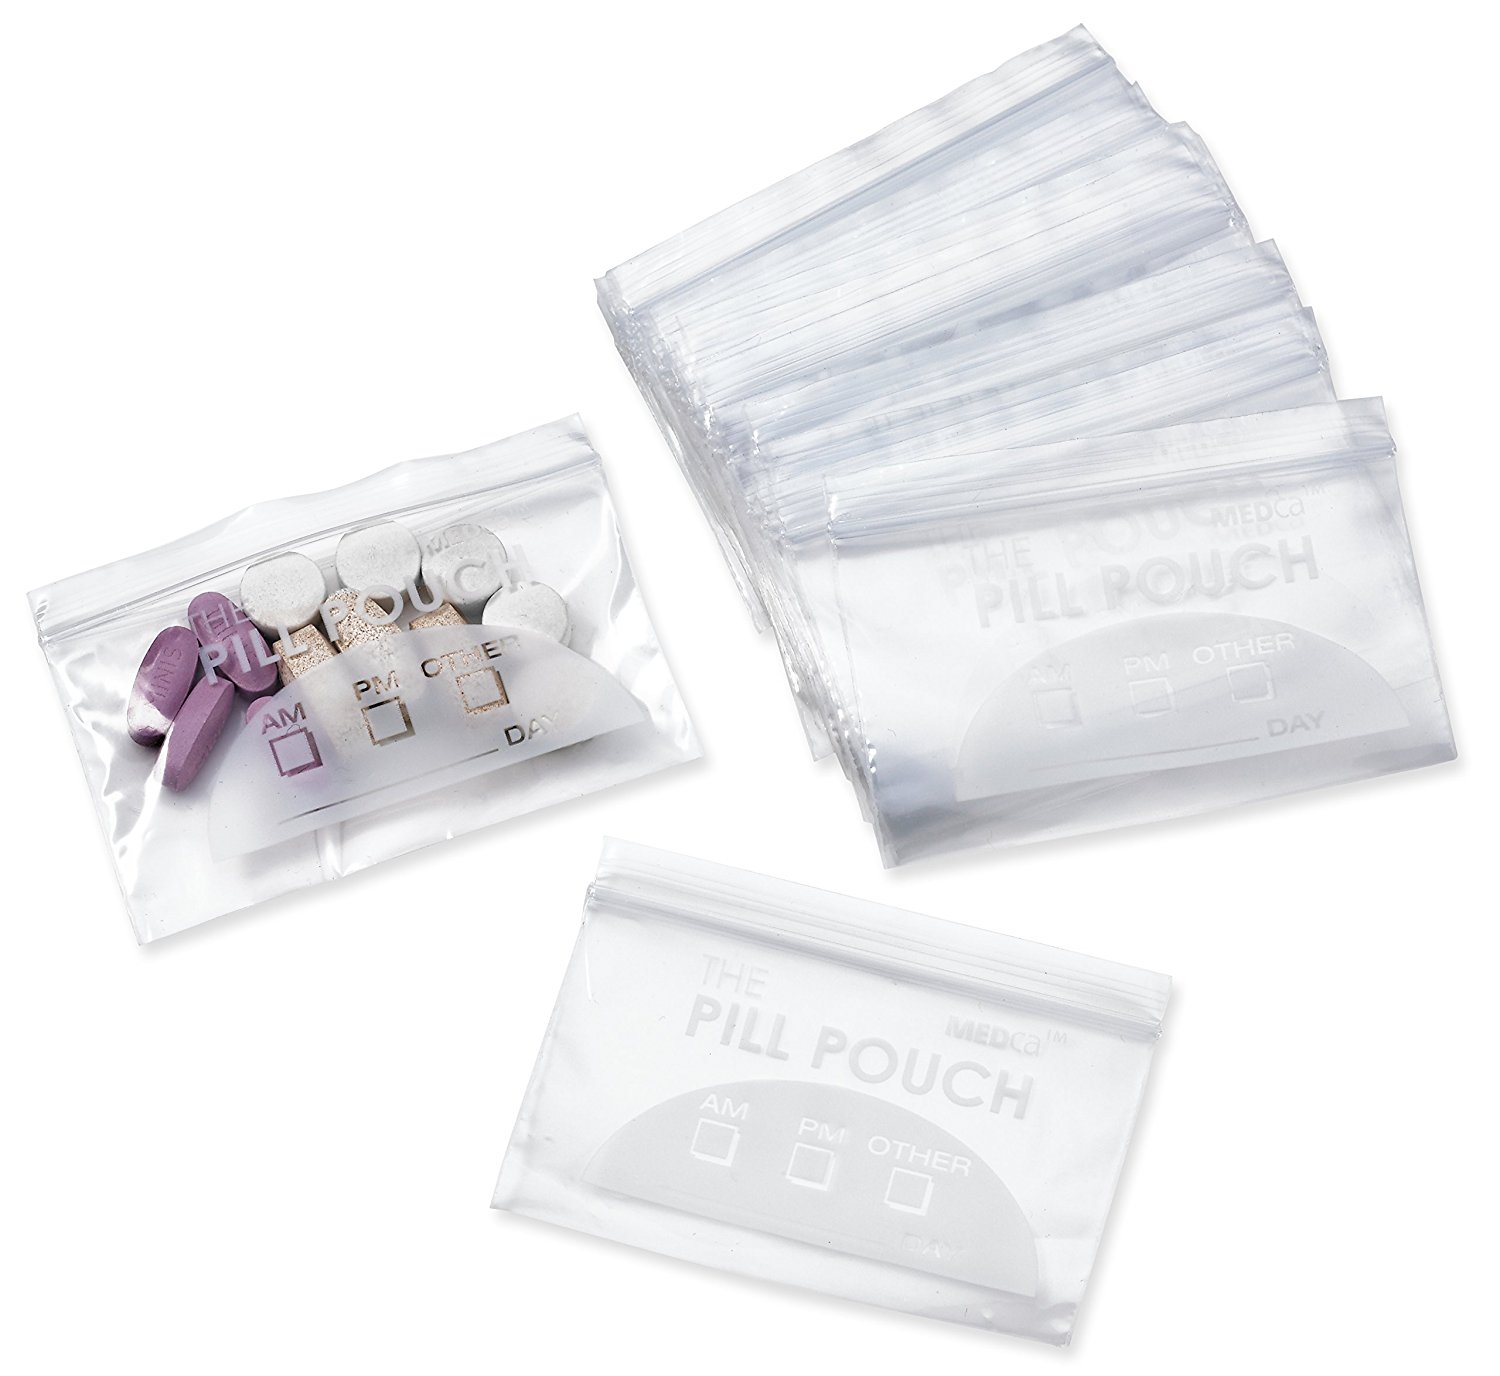 Plastic Pill Travel Organizer Bags With Write-On Labels - 600 Ct